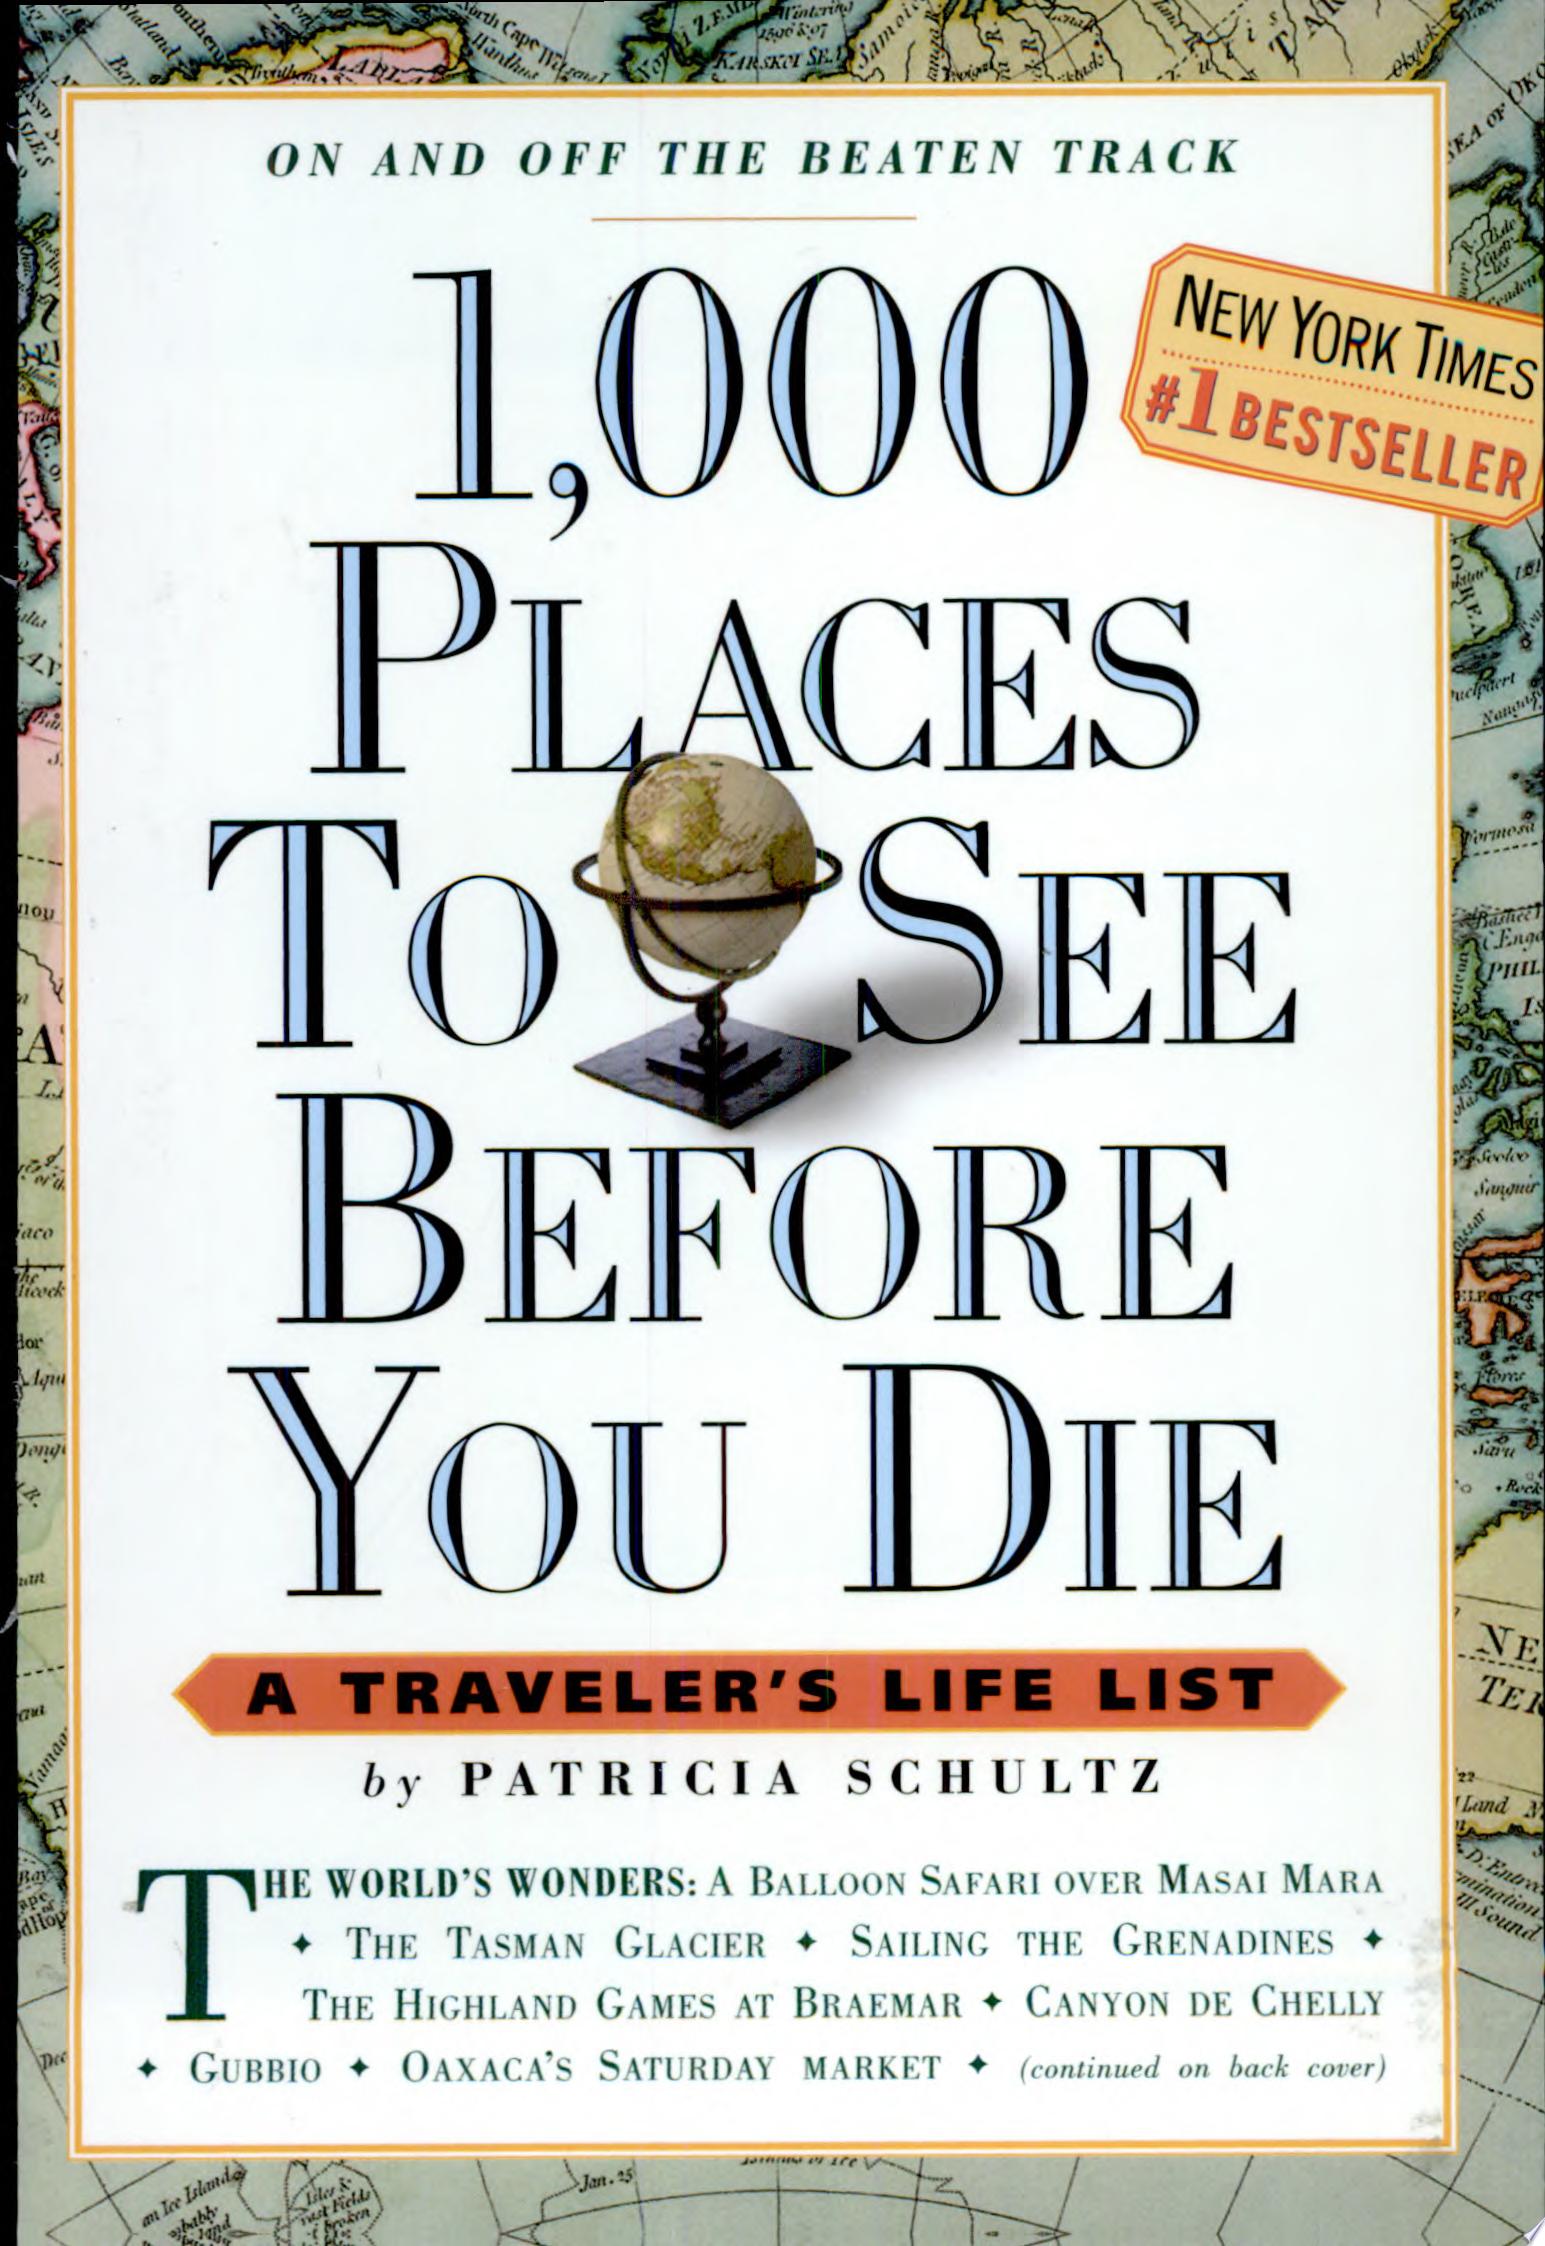 Image for "1,000 Places to See Before You Die"